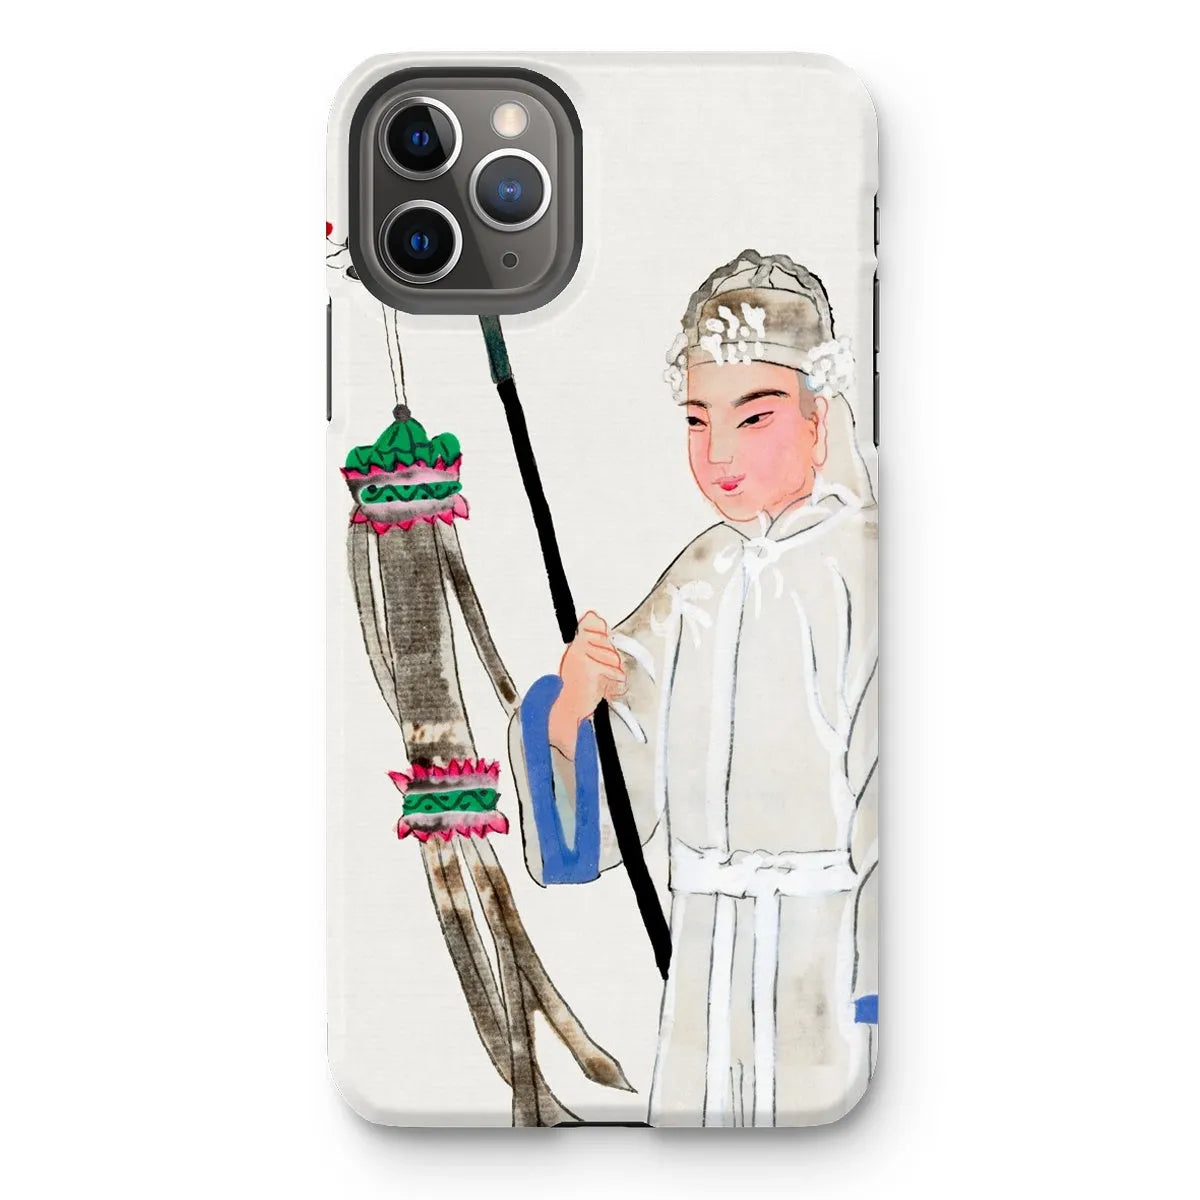 Man In Mourning - Chinese Historical Art Phone Case - Iphone 11 Pro Max / Matte - Mobile Phone Cases - Aesthetic Art